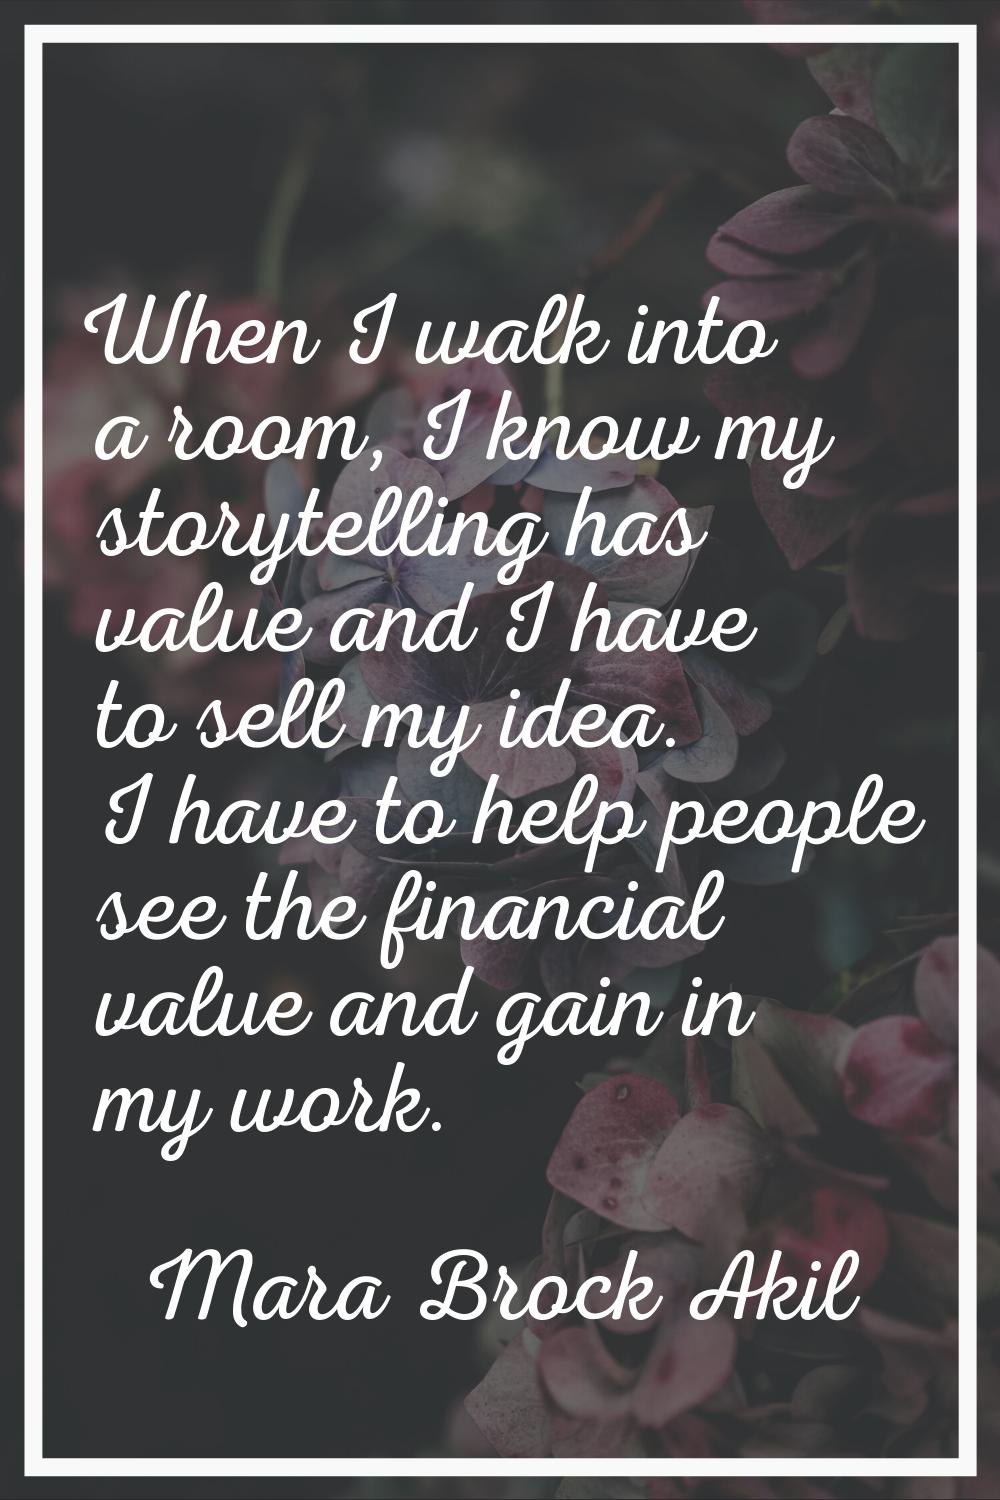 When I walk into a room, I know my storytelling has value and I have to sell my idea. I have to hel